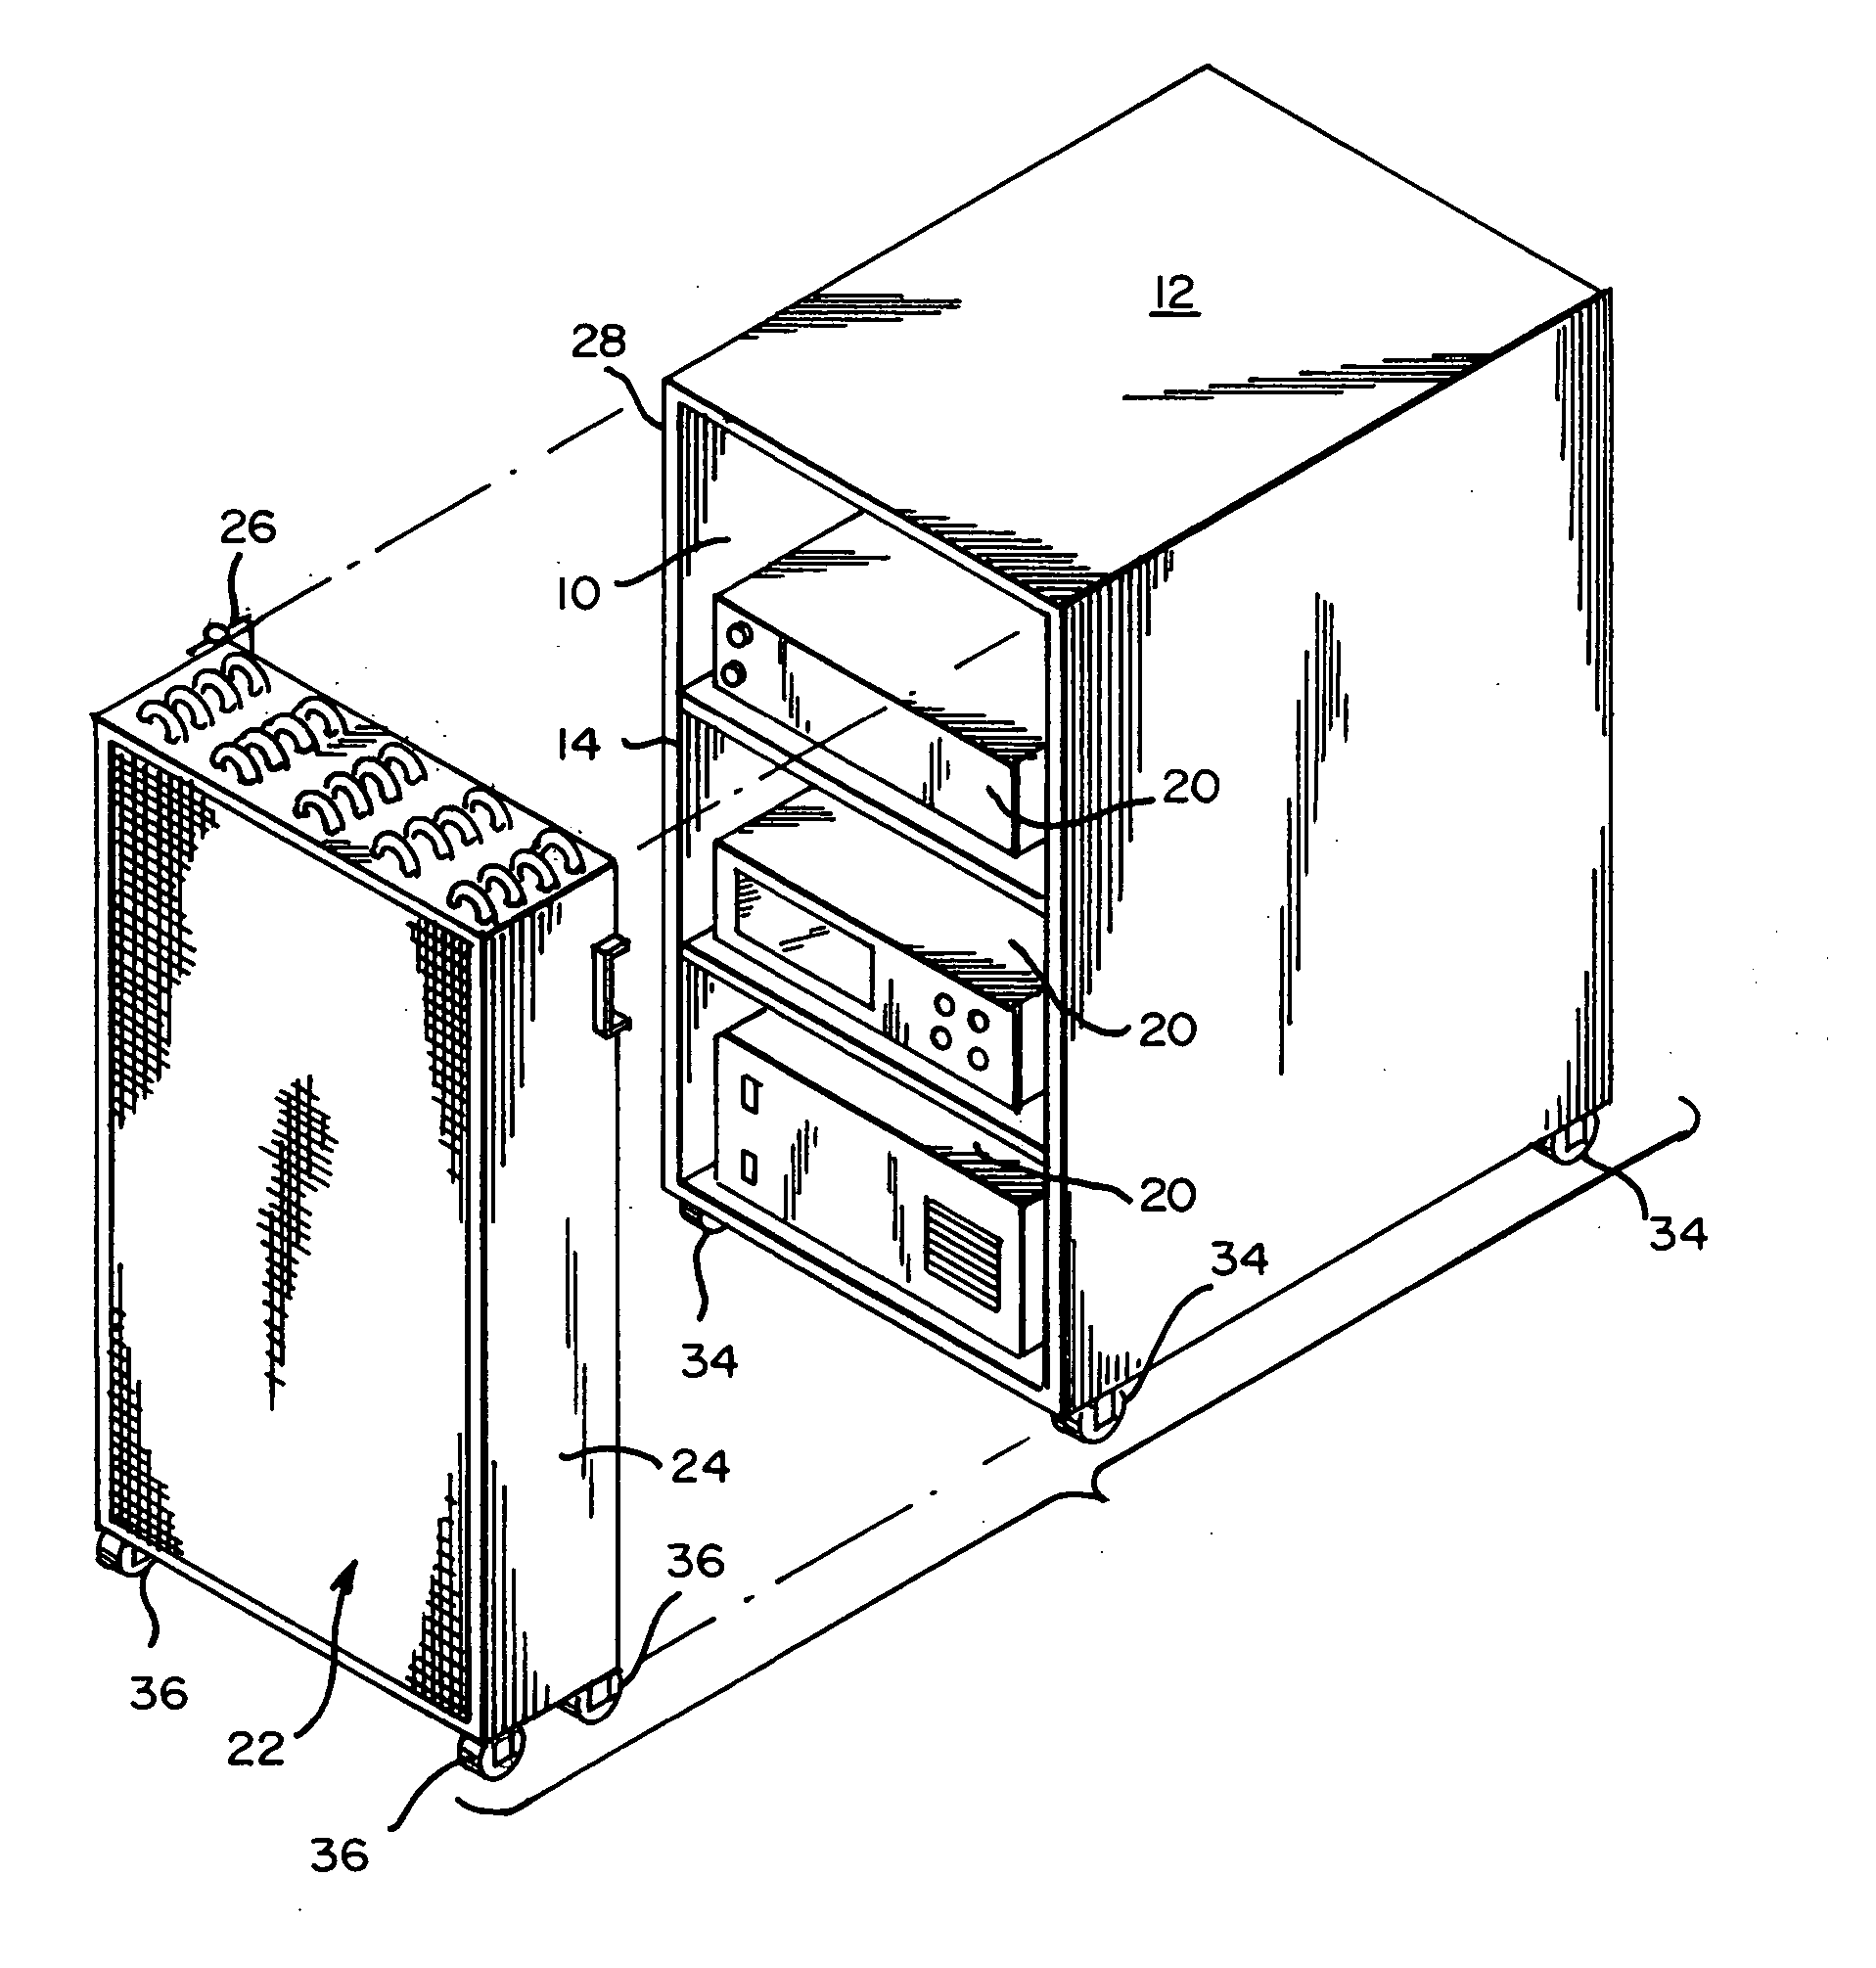 Method and apparatus for cooling devices that in use generate unwanted heat